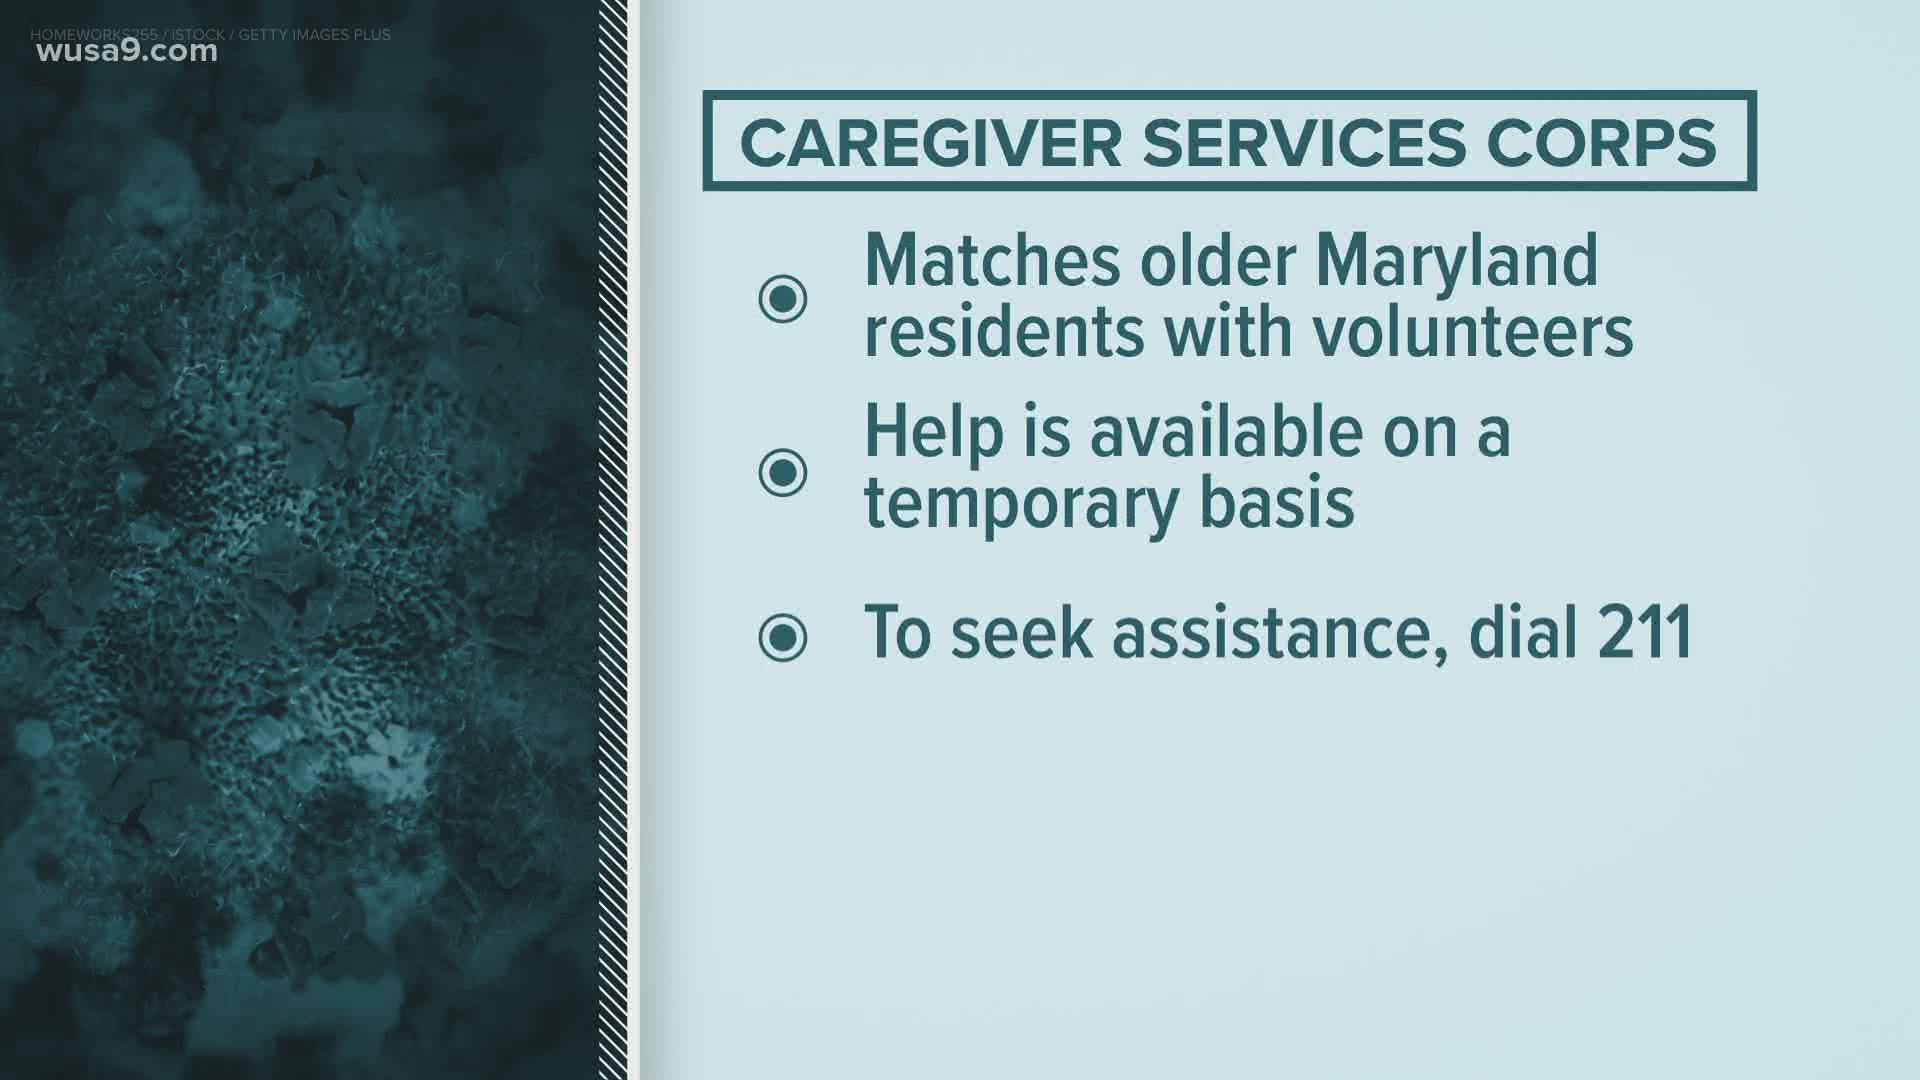 Hogan has also expanded the Maryland Department of Aging’s free Senior Call Check program, which places a daily check-in call to enrolled seniors.